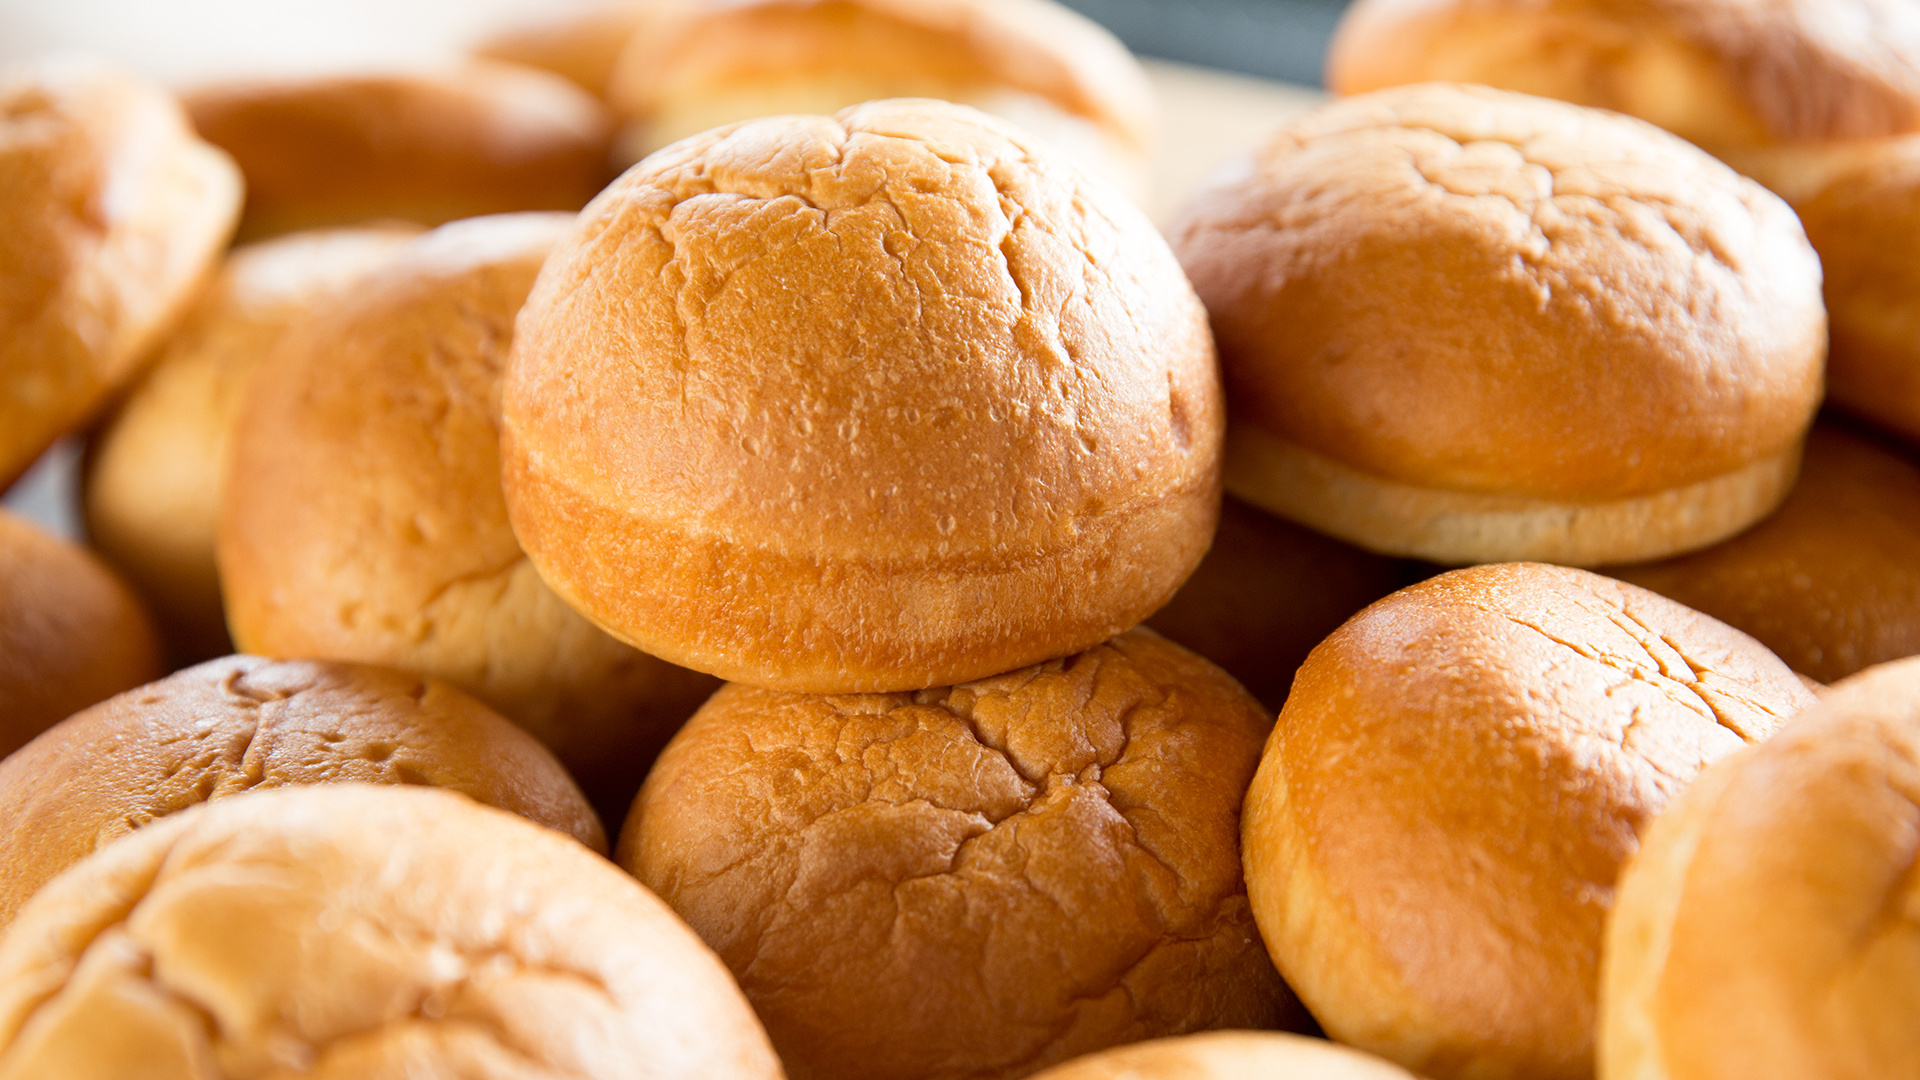 Grainy and tasty bun, Wholesome delight, Sweet treat, Texture and flavor, 1920x1080 Full HD Desktop